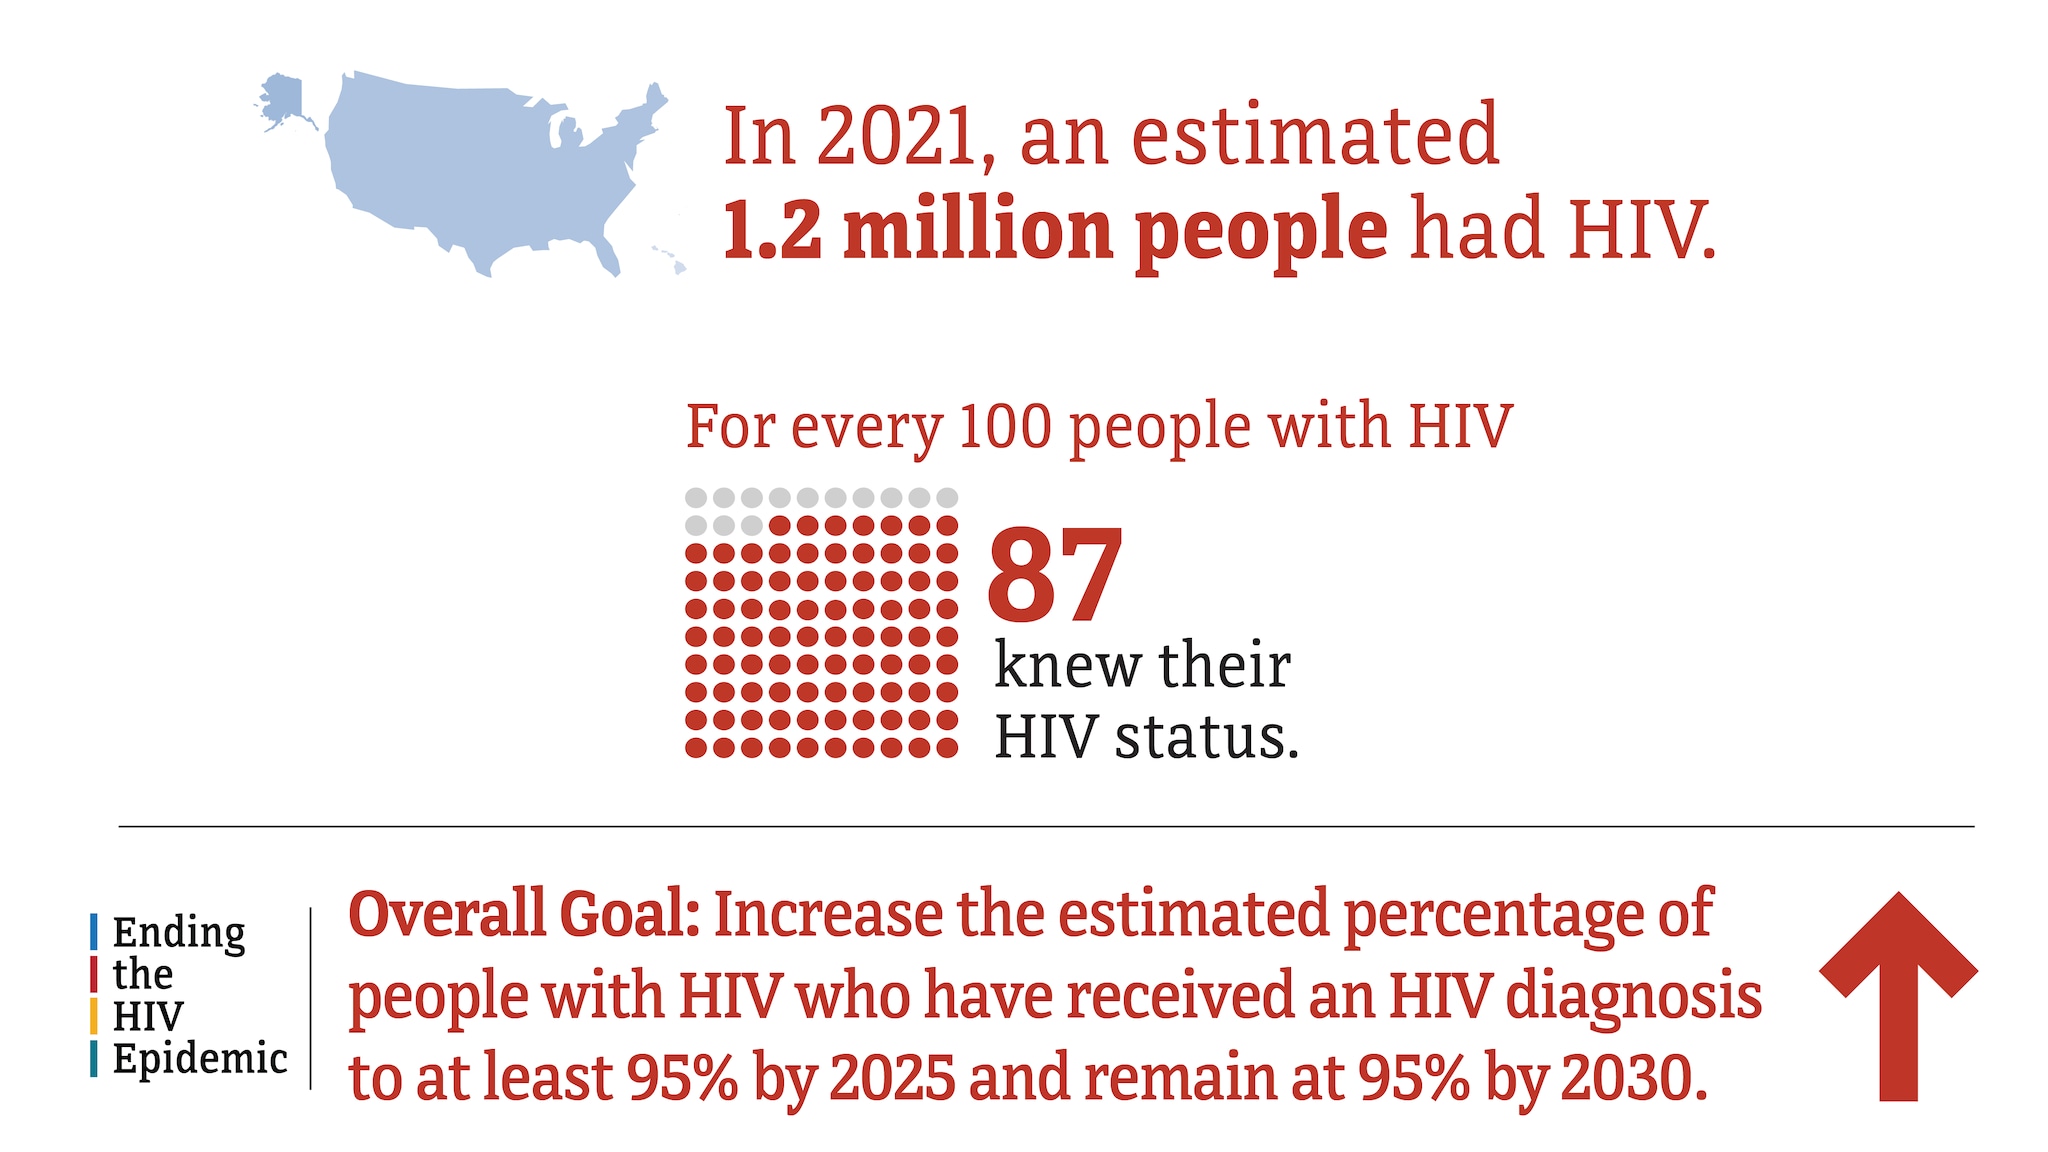 In 2021, an estimated 1.2 million people had HIV in the US. For every 100 people with HIV, 87 knew their HIV status. The Ending the HIV Epidemic overall goal is to increase the estimated percentage of people with HIV who have received an HIV diagnosis to at least 95 percent by 2025 and remain at 95 percent by 2030.